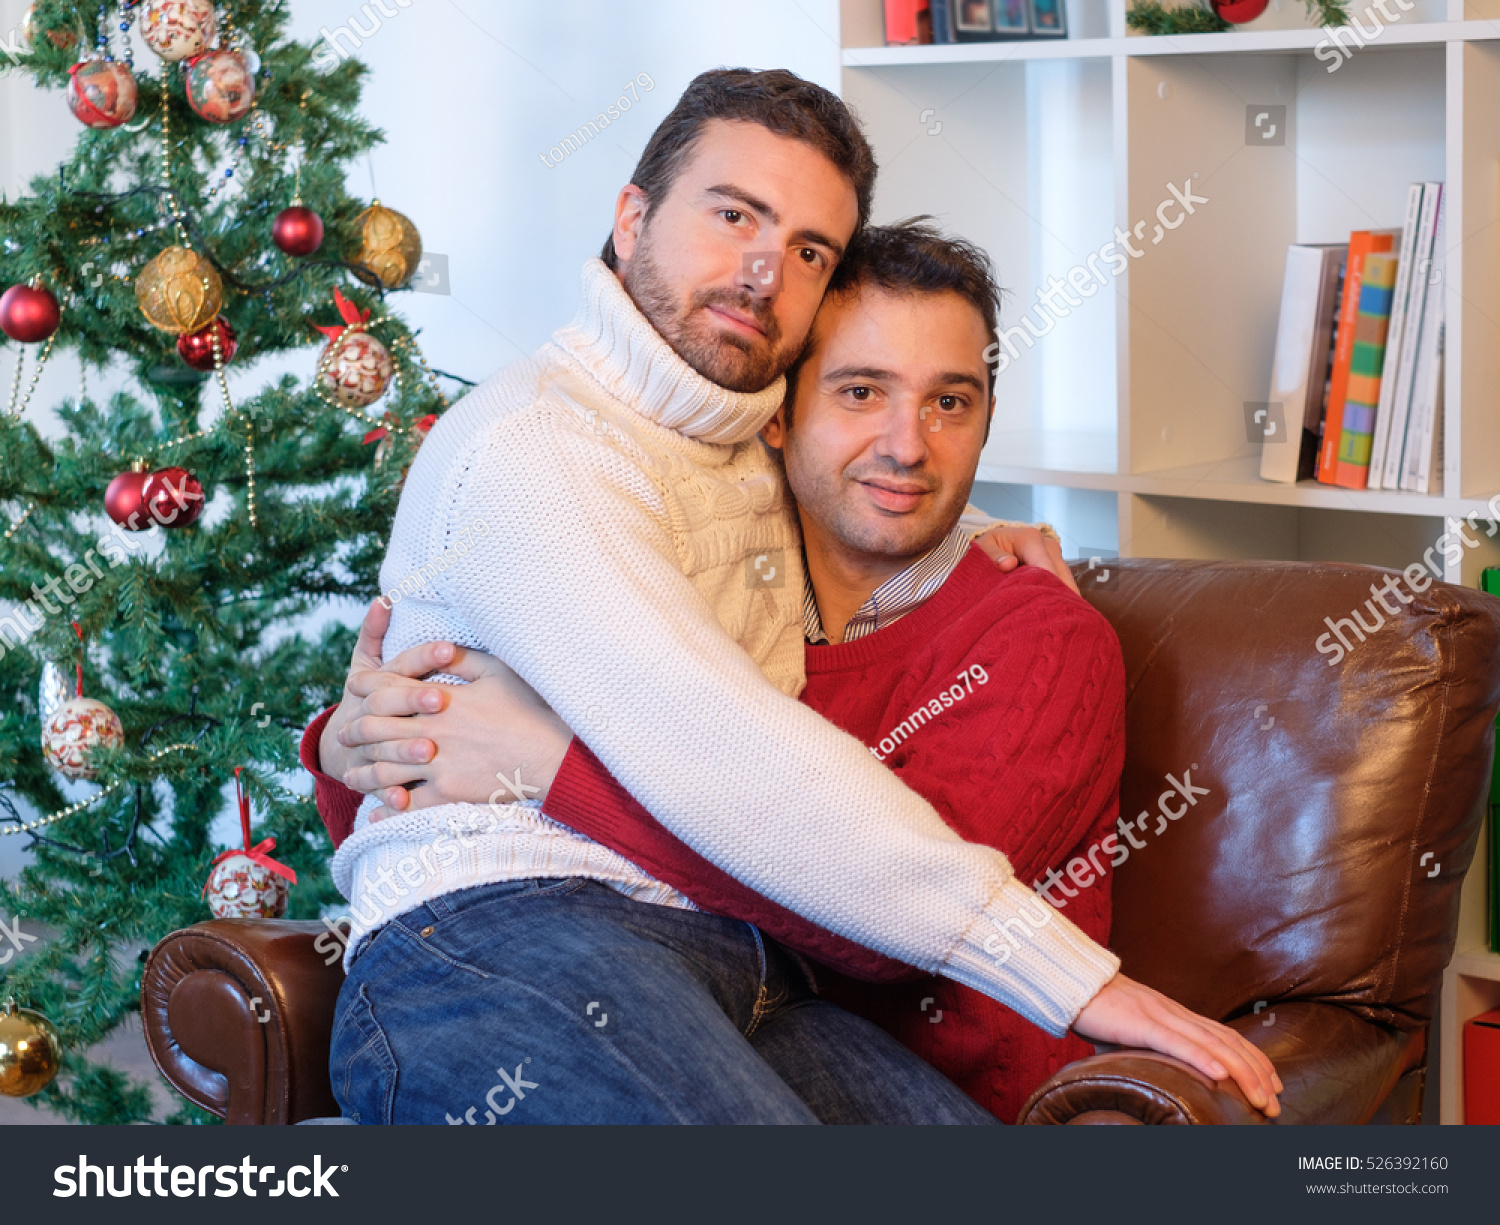 stock-photo-gay-couple-of-men-embracing-during-christmas-time-526392160.jpg